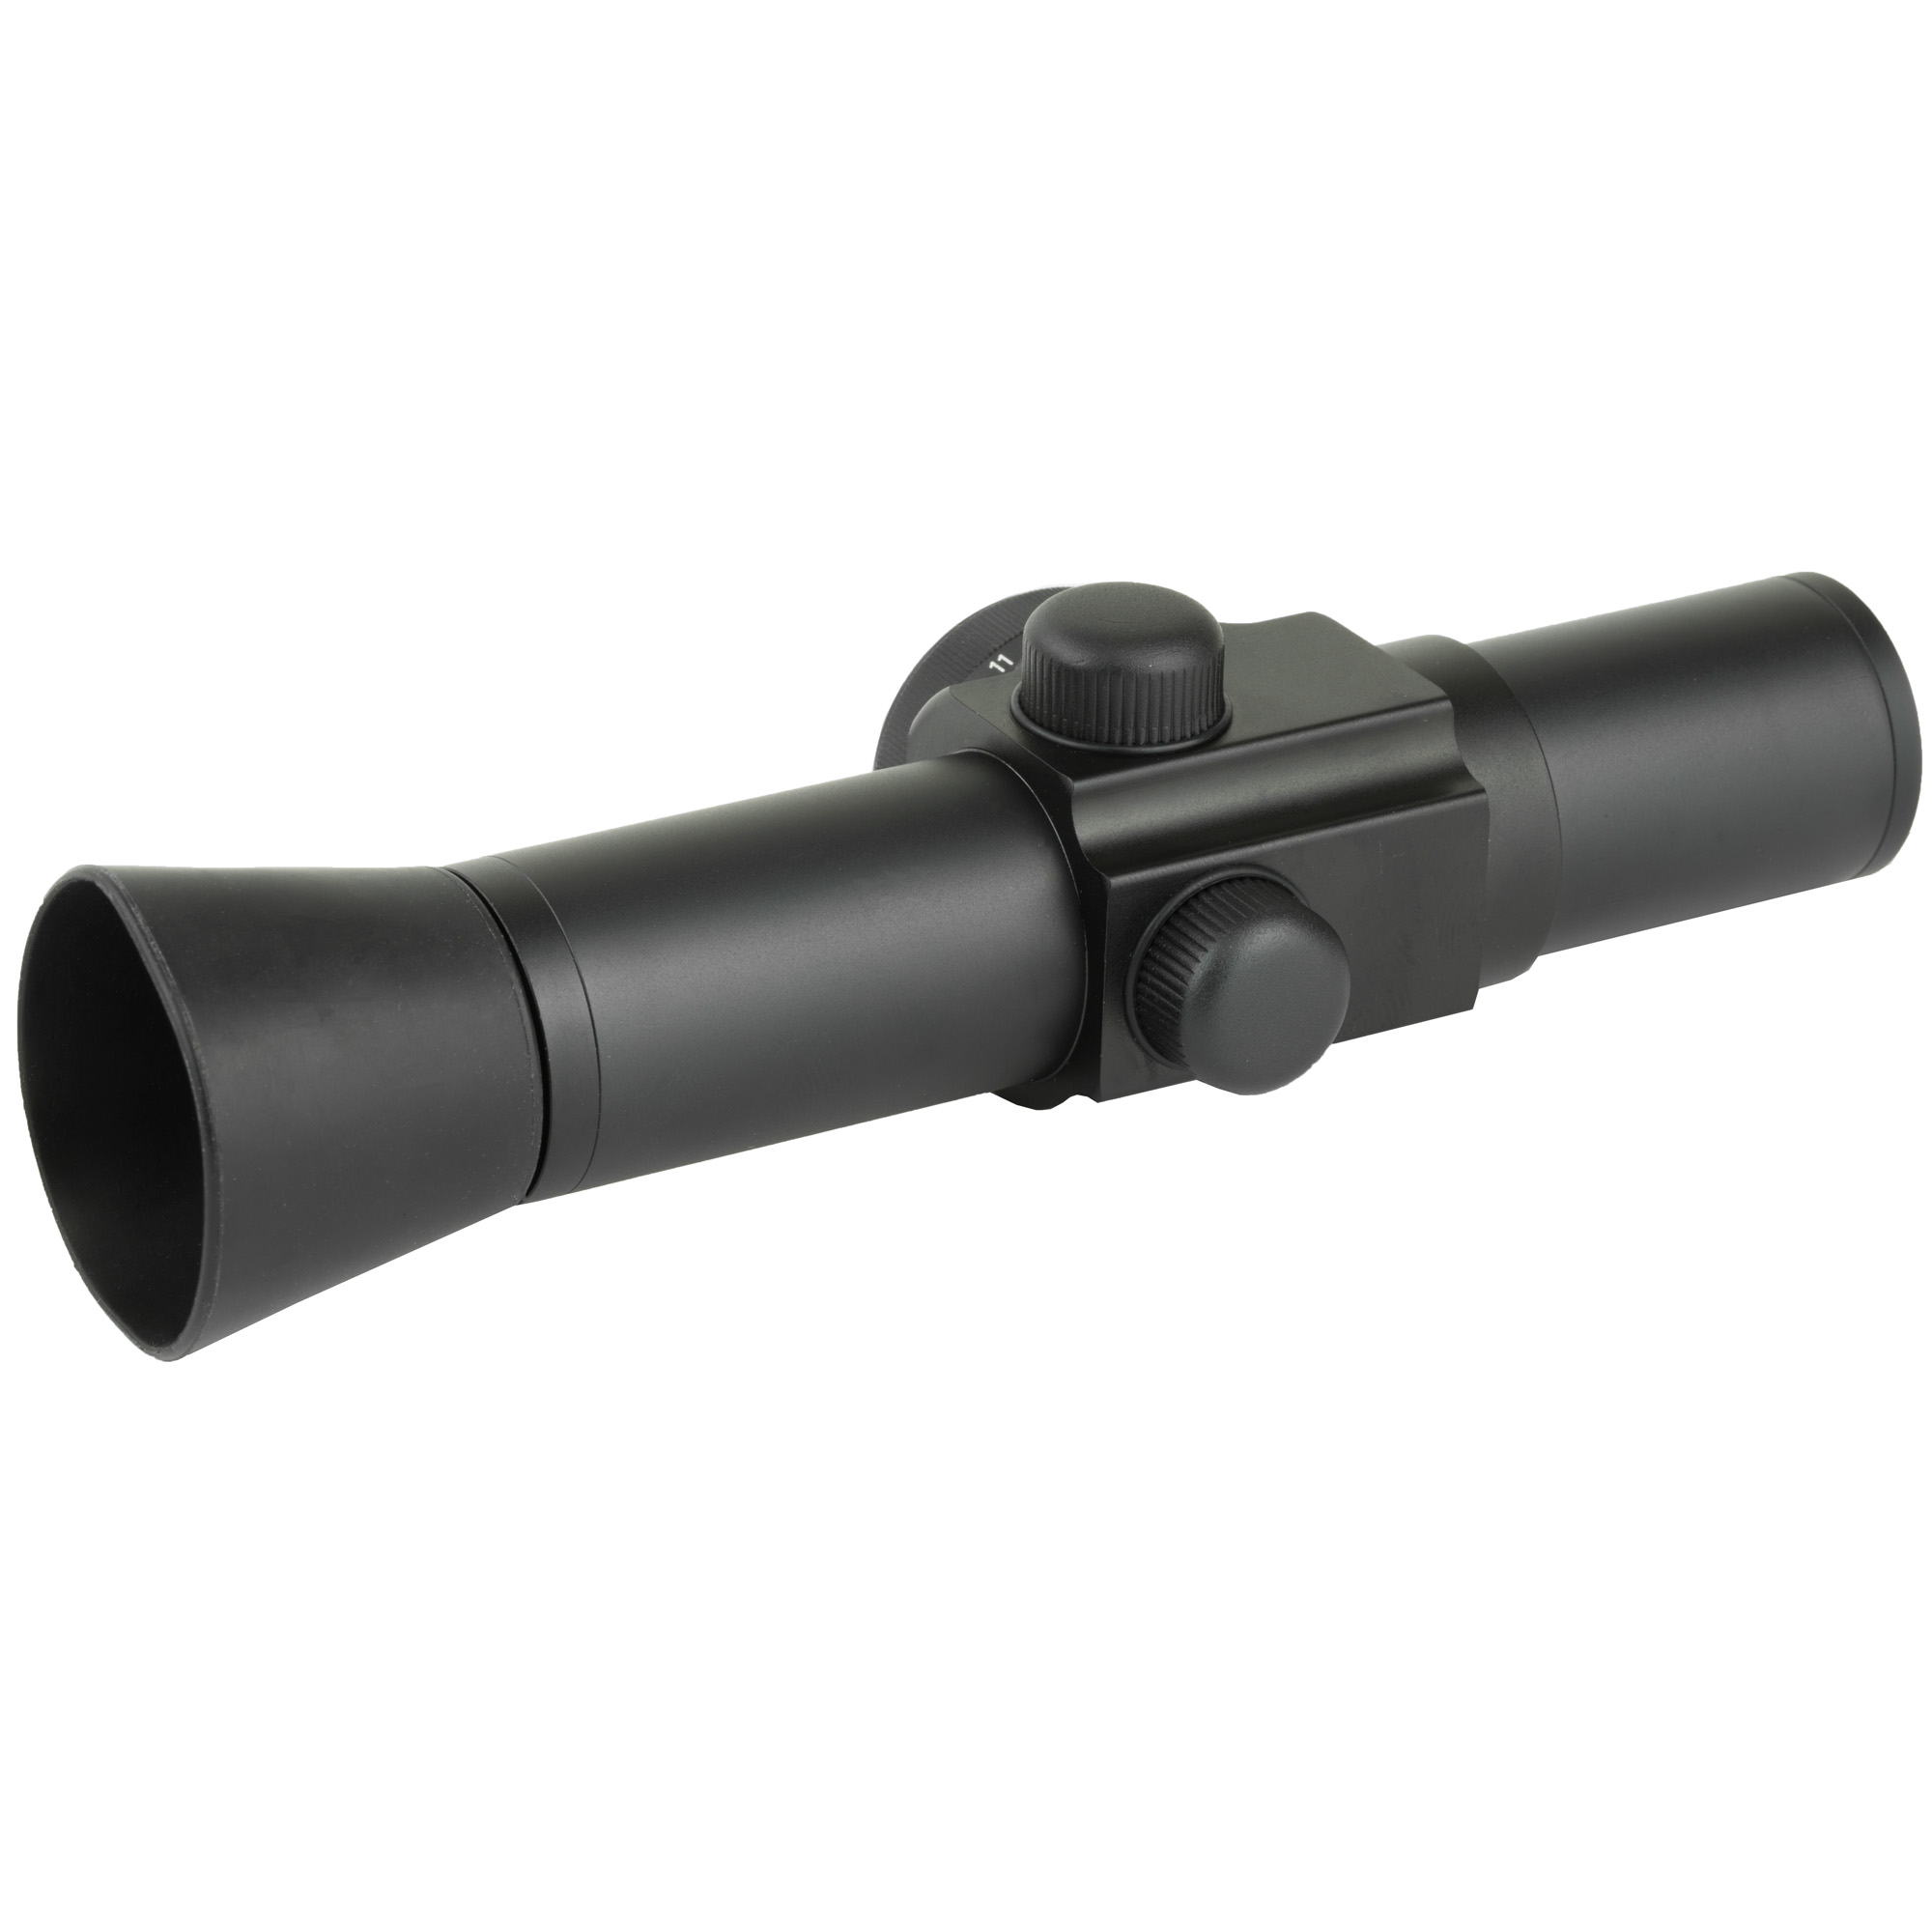 Aal Ud G1 25mm Tube 4moa Blk